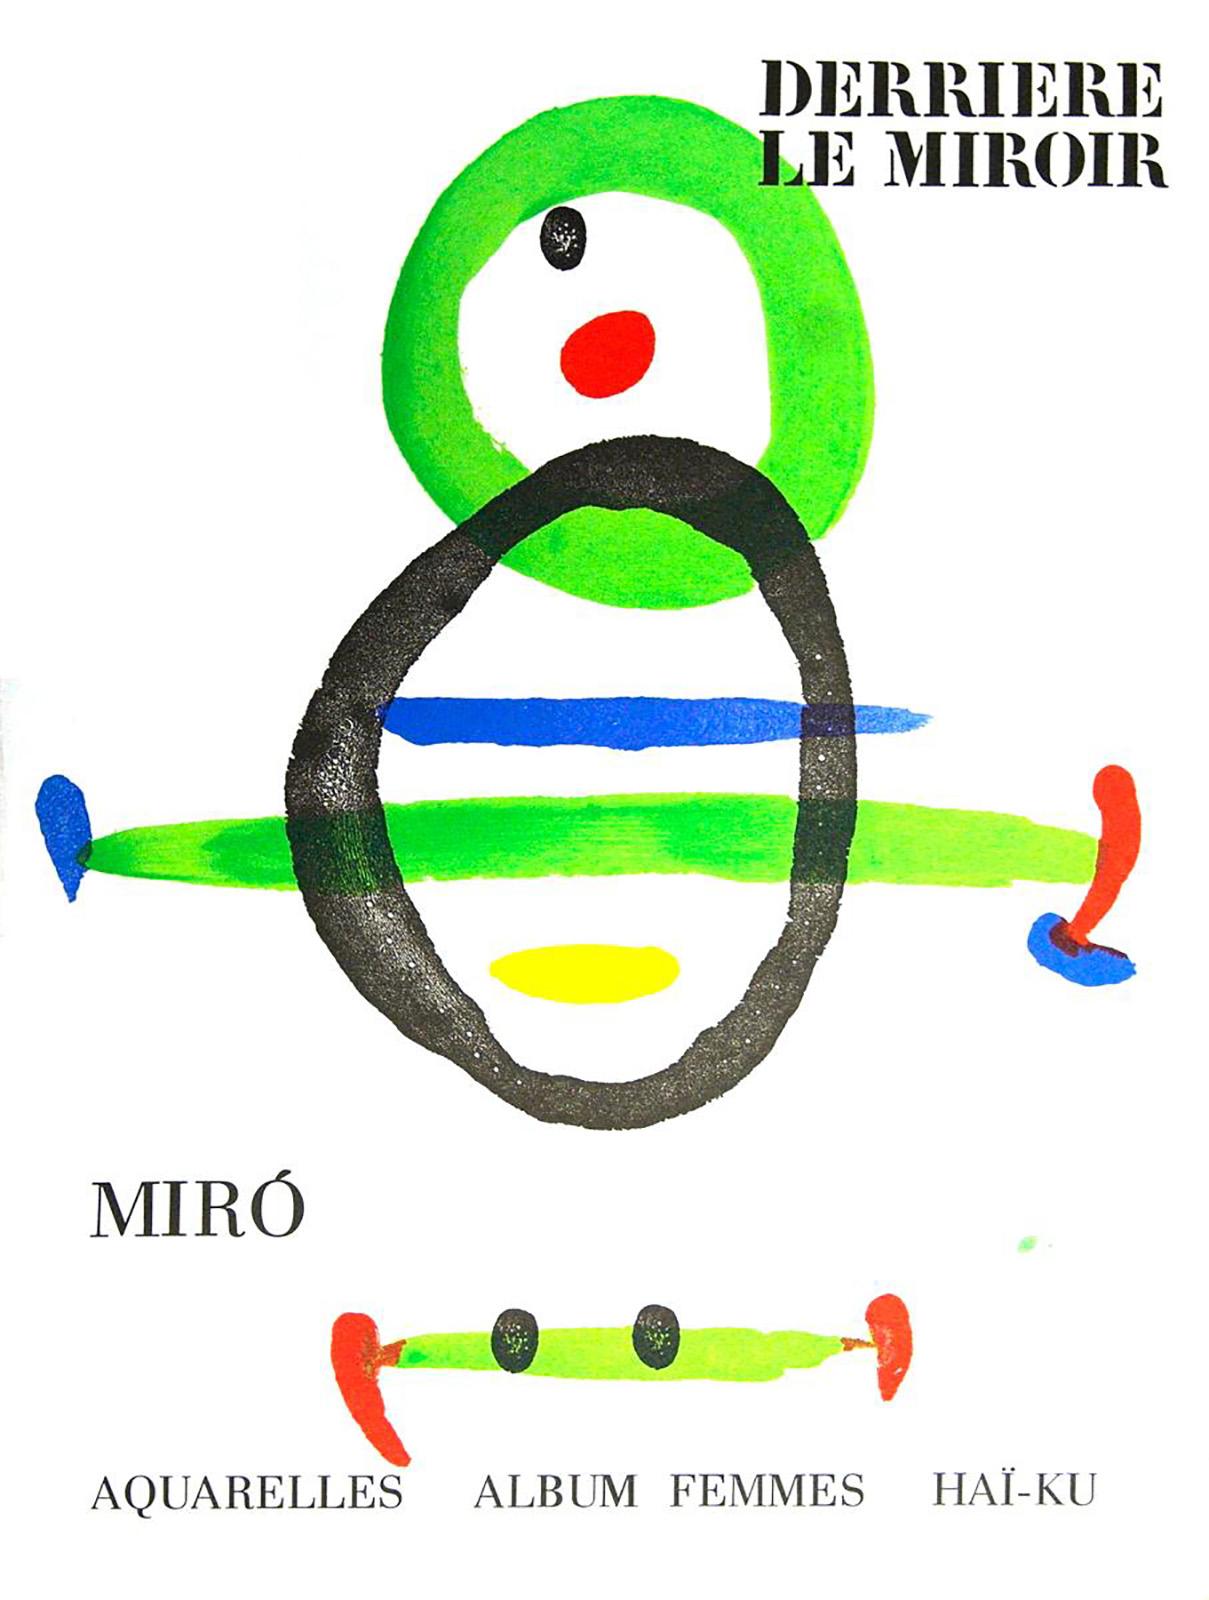 Joan Miró lithographic cover: Derrière le miroir:

Lithographic cover; 15 x 11 inches.
Very good overall vintage condition.
Unsigned from an edition of unknown.
Portfolio: Derrière le miroir, c.1968.
Looks superb matted & framed.

Derrière le